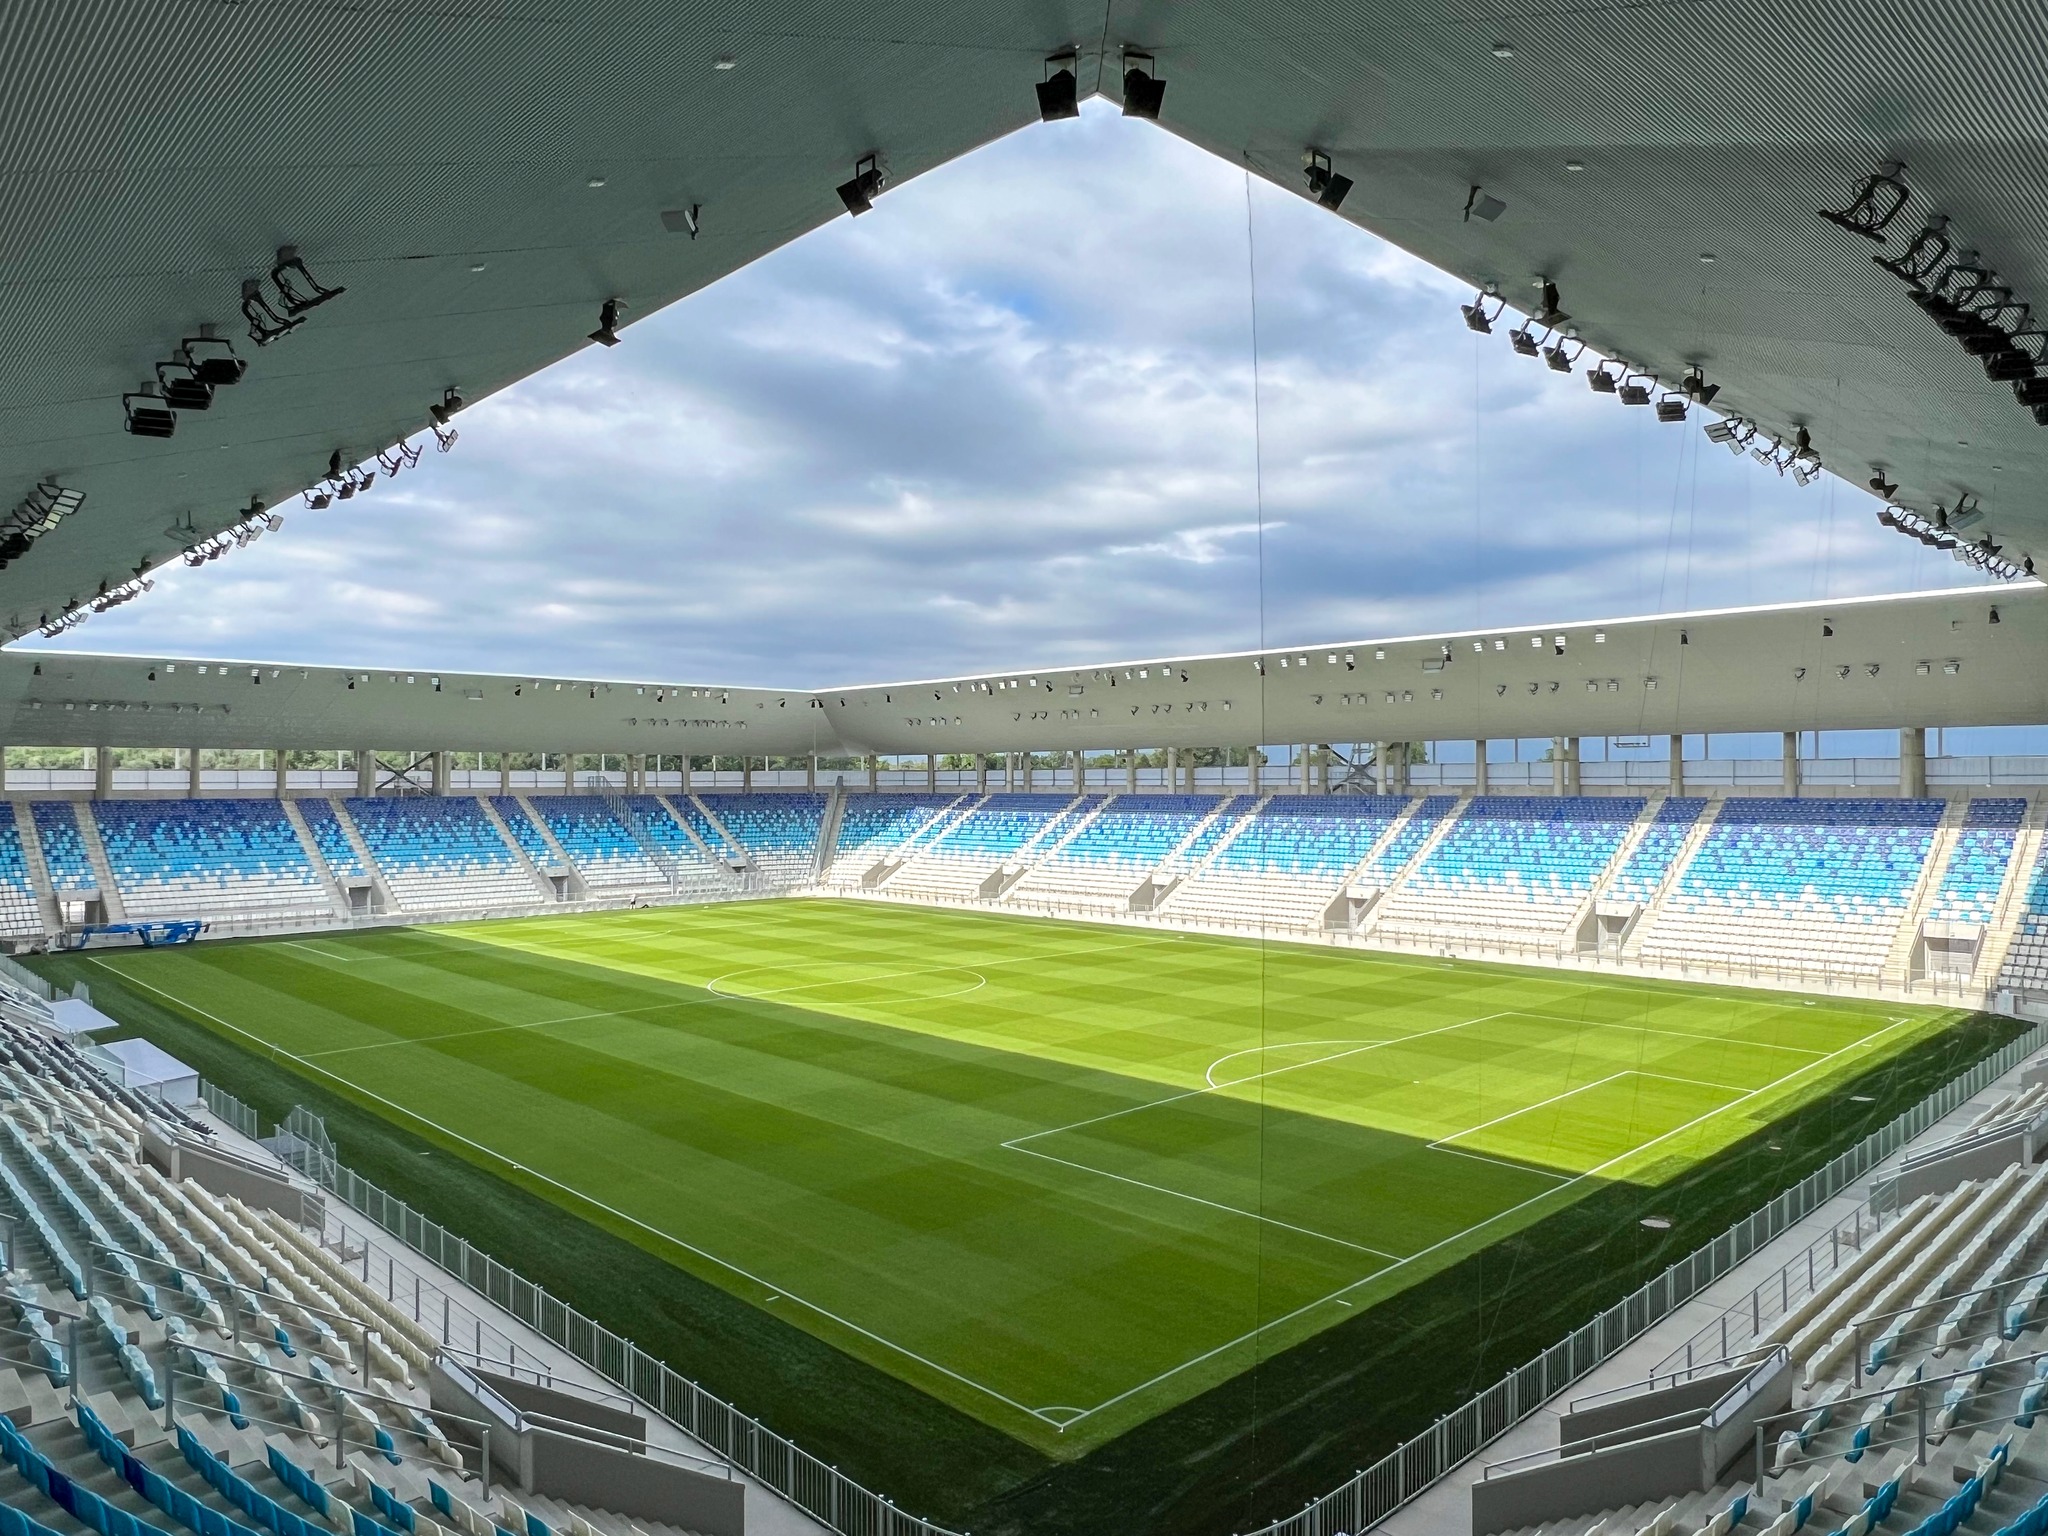 Osijek’s new stadium readies for opening as pitch gets markings